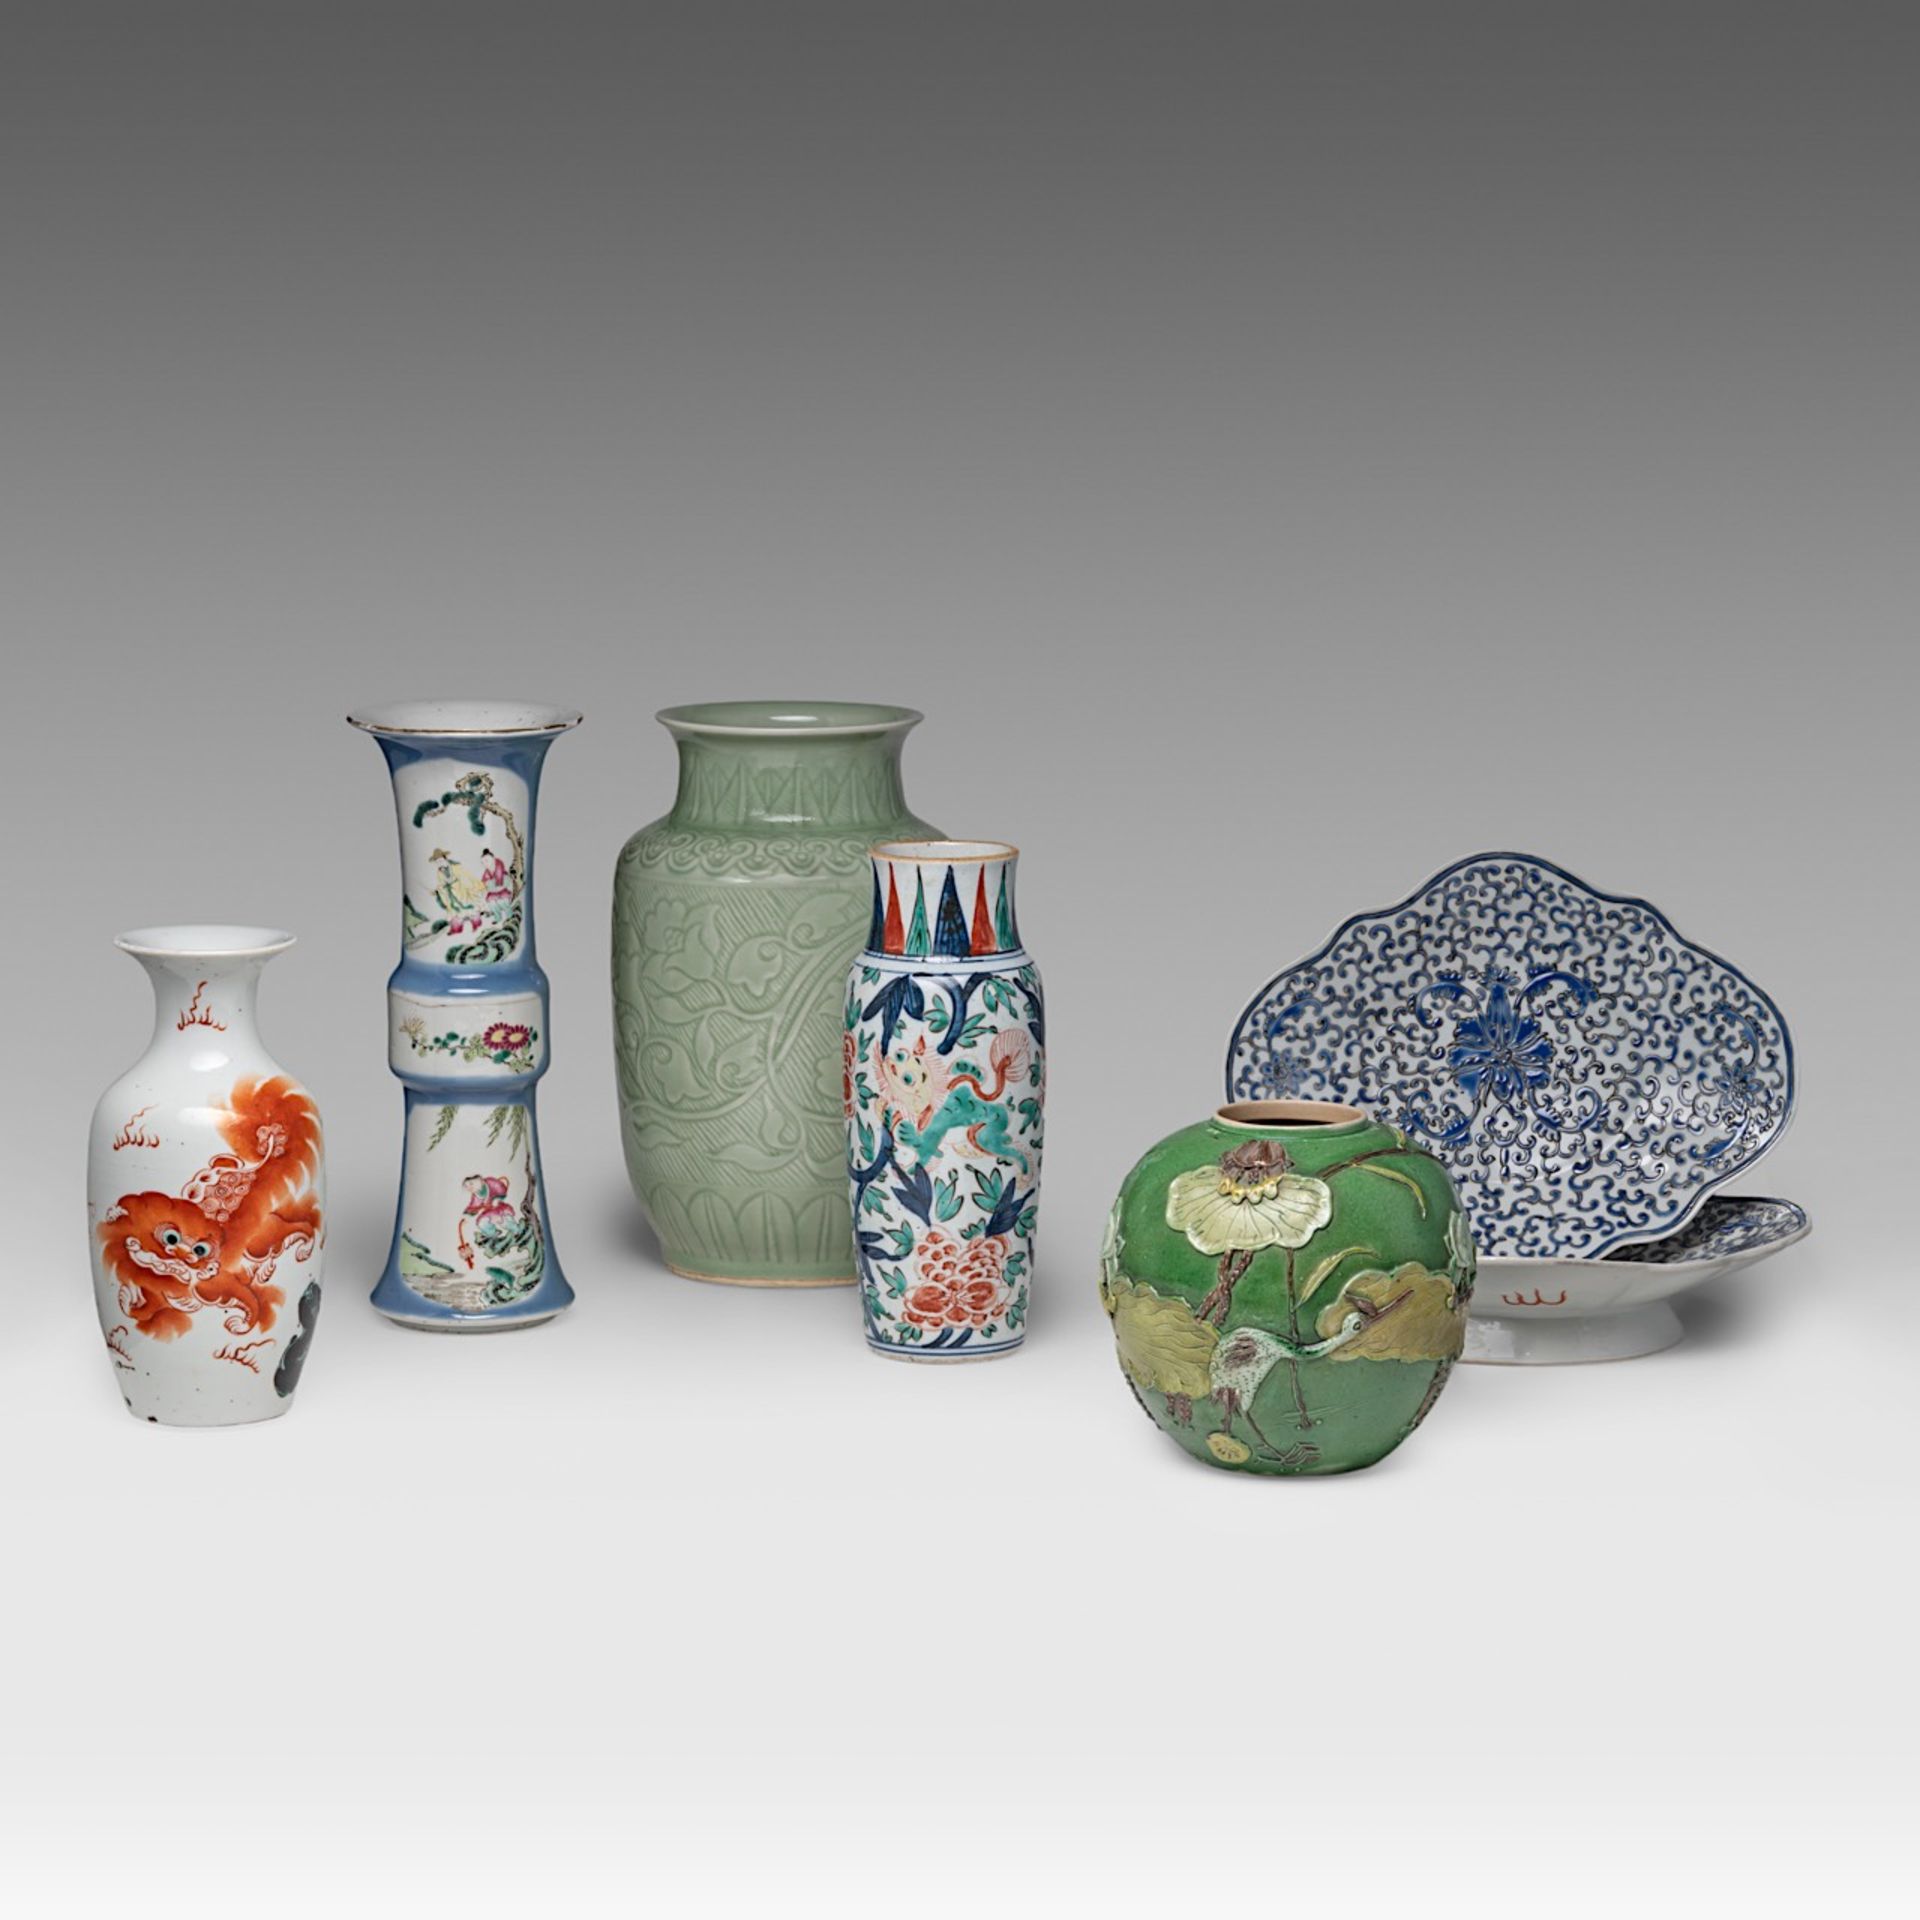 A collection of seven Chinese polychrome porcelain ware, 17thC, 19thC and 20thC, tallest H 30,4 cm (